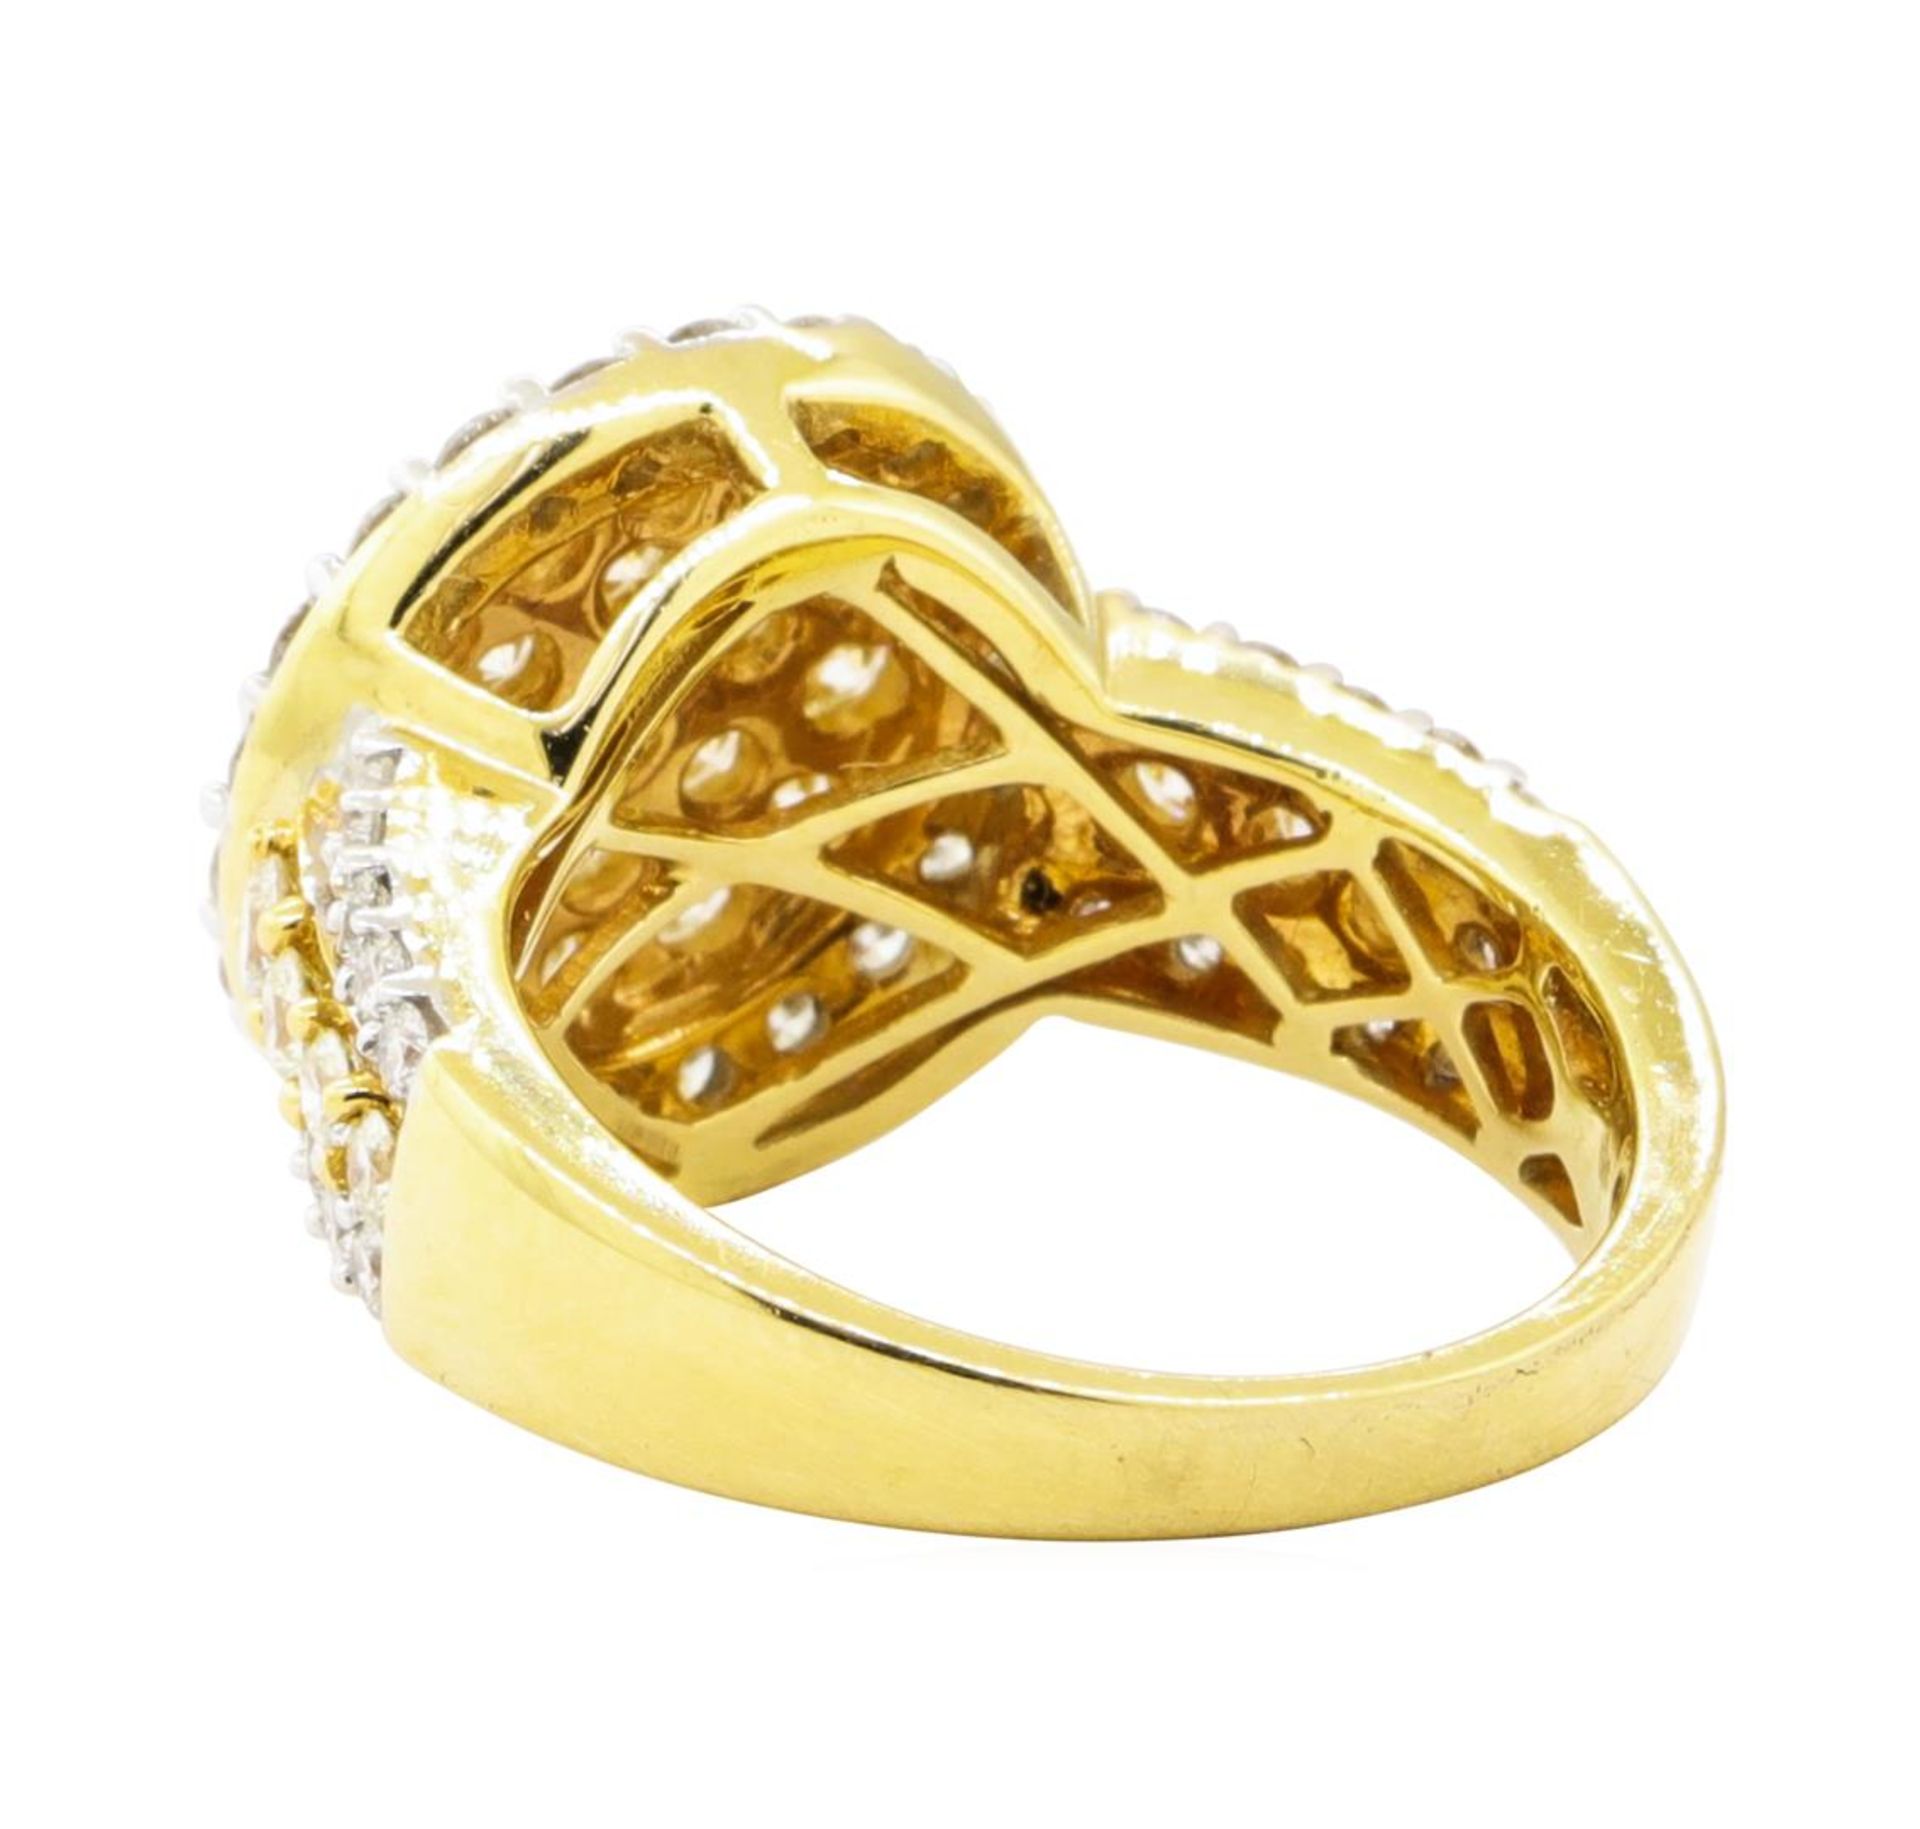 2.26 ctw Diamond Ring - 18KT Yellow With Rhodium Plating Gold - Image 3 of 4